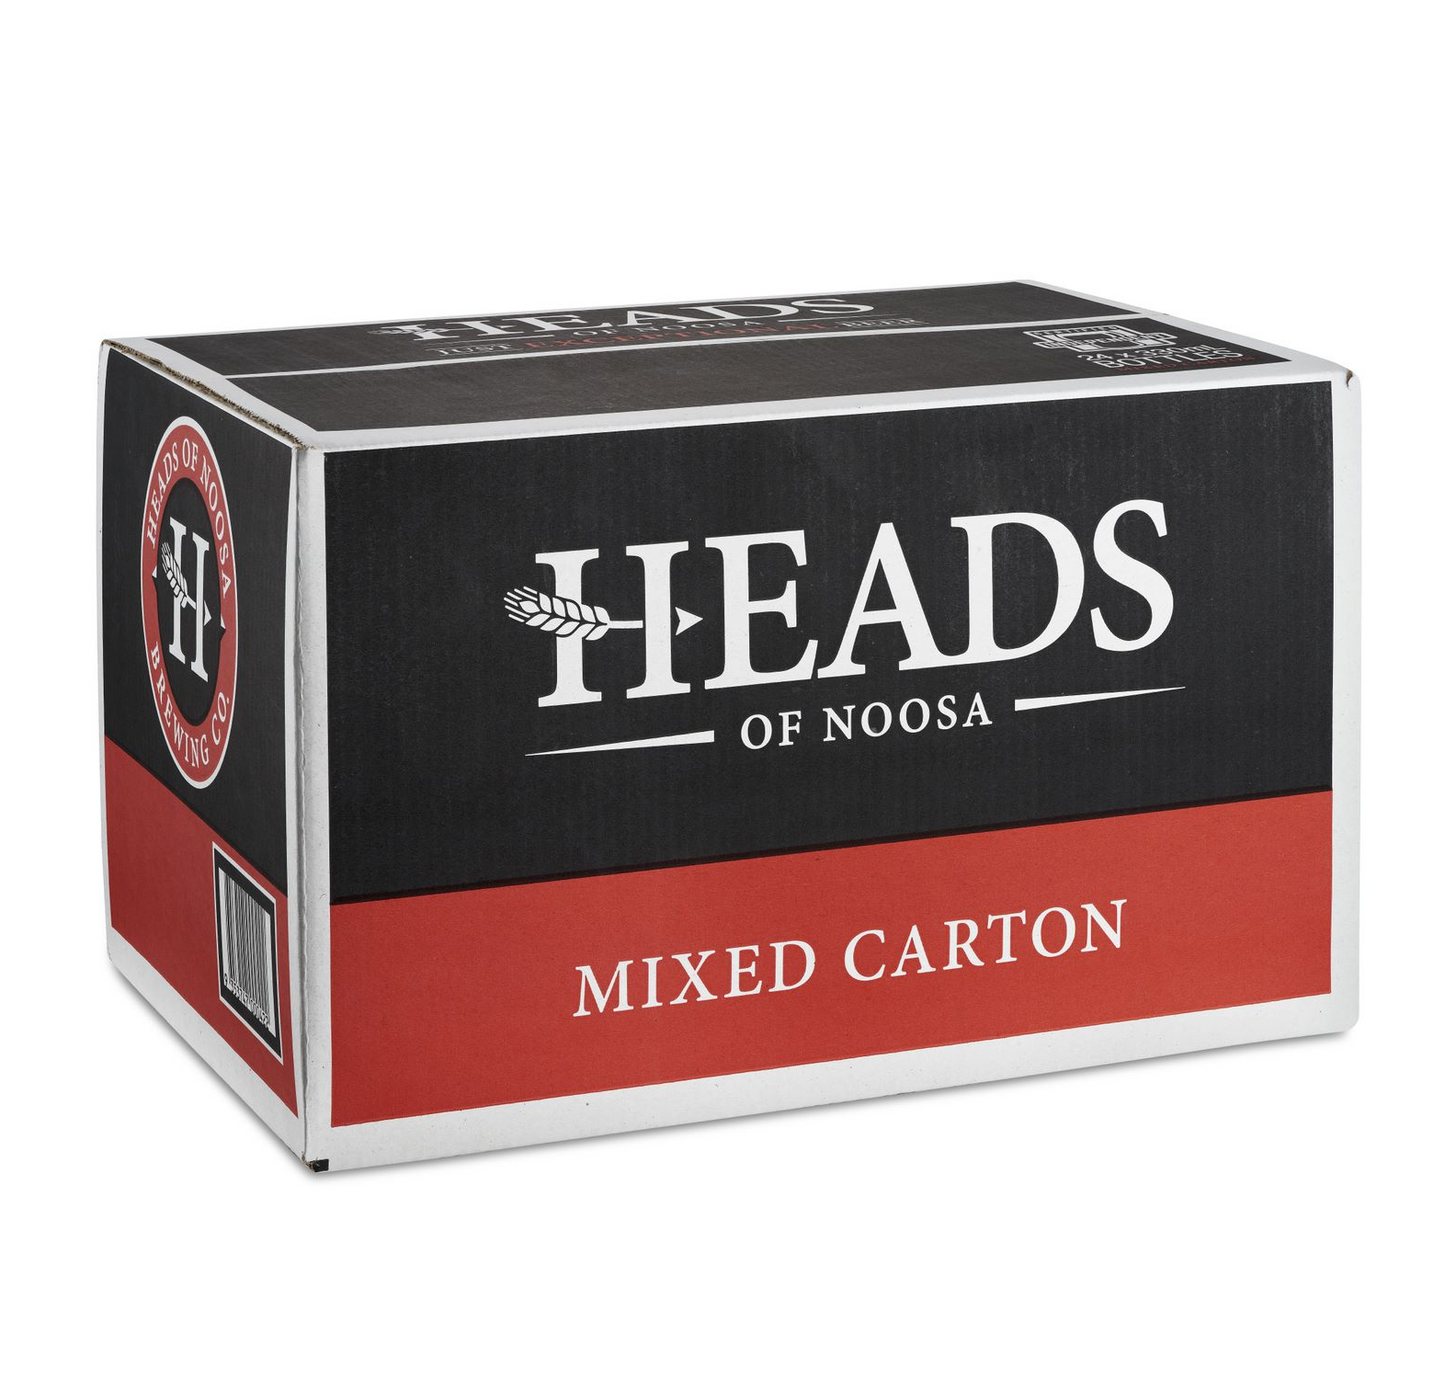 Mixed Carton - 12 x Japanese, 6 x Lager 3.5, 6 x Amber Lager